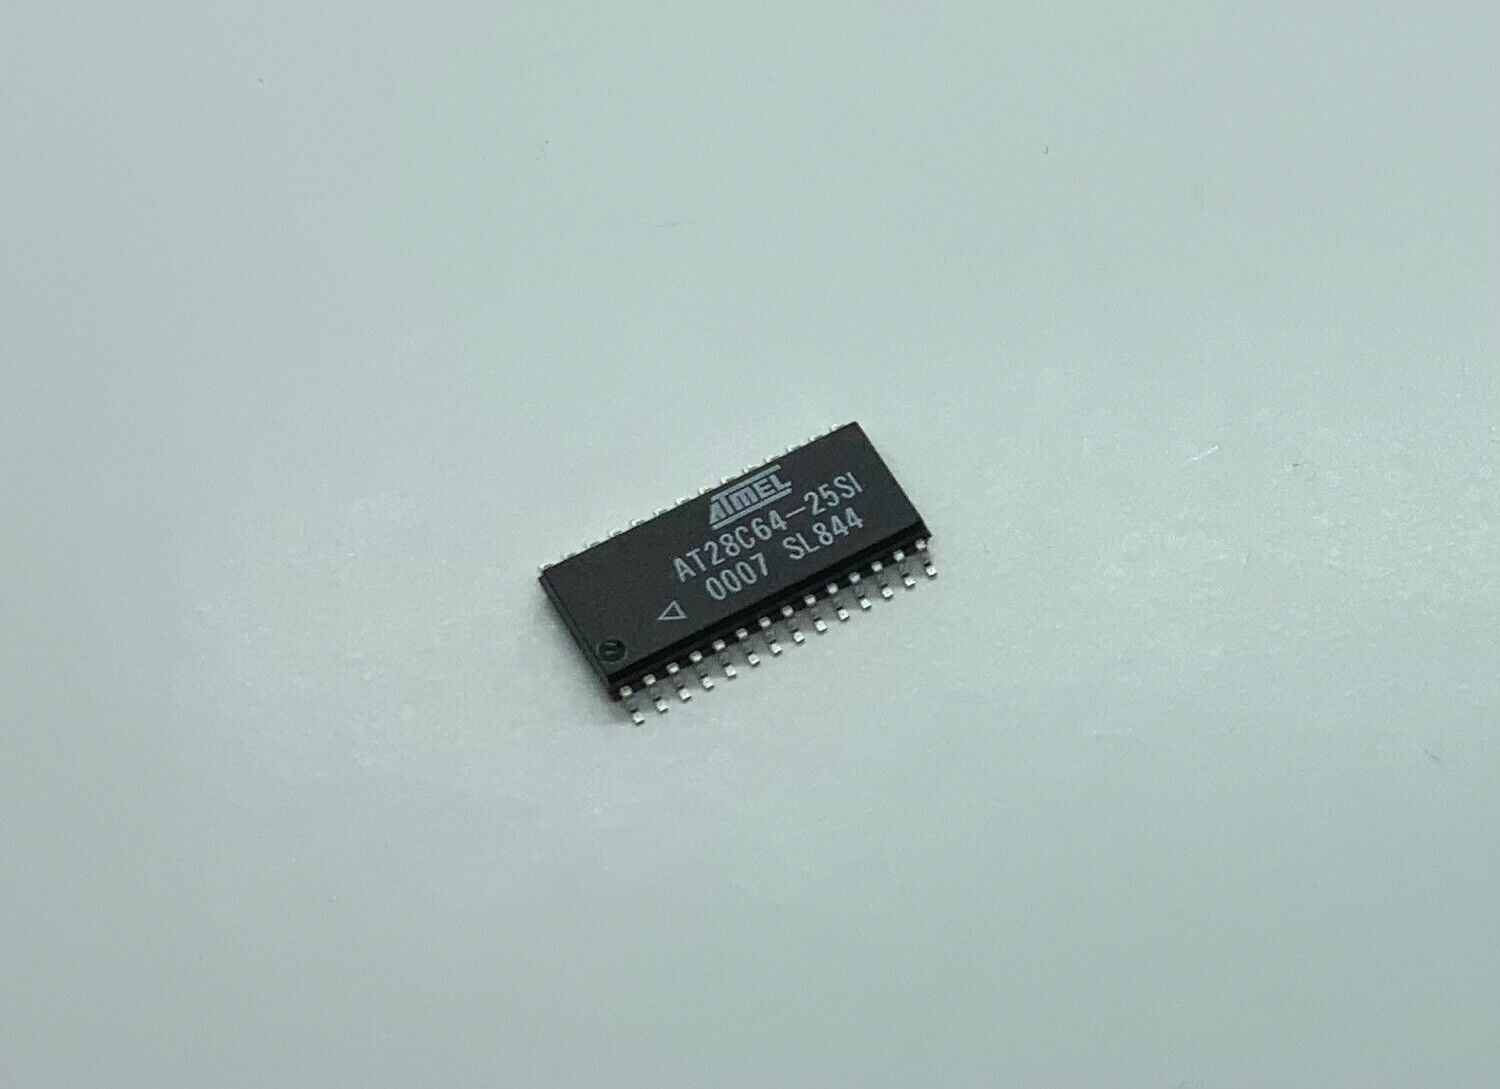 Atmel AT28C64-25SI 28C64 IC EEPROM 64K (8K x 8) Parallel - 28 pin SOIC (1 Piece)